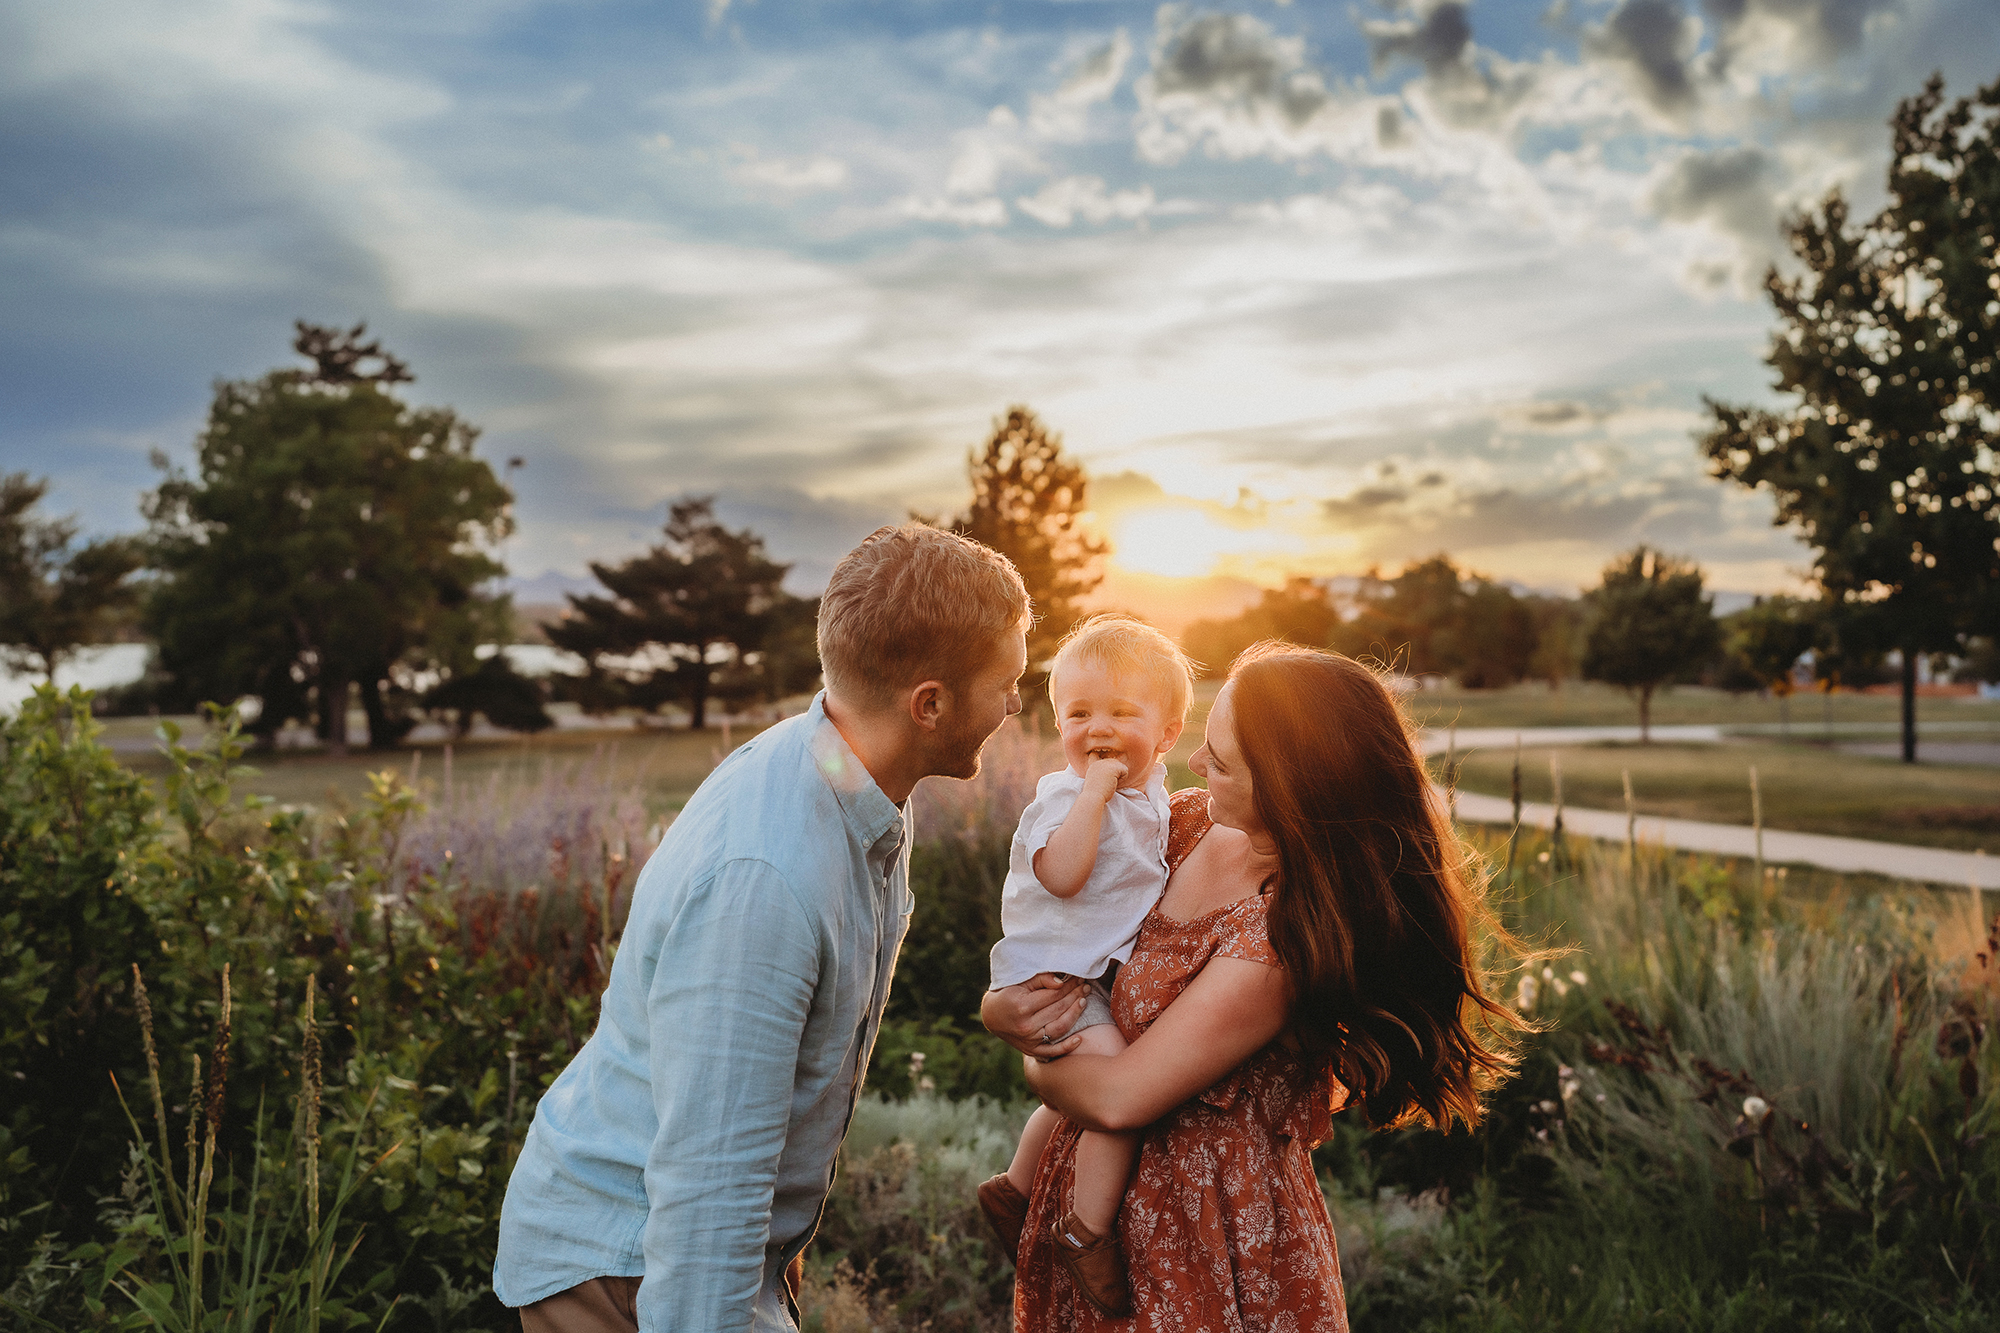 denver family photographers captures young family together in a field cuddling each other as the sunsets in the distance for their denver family photos